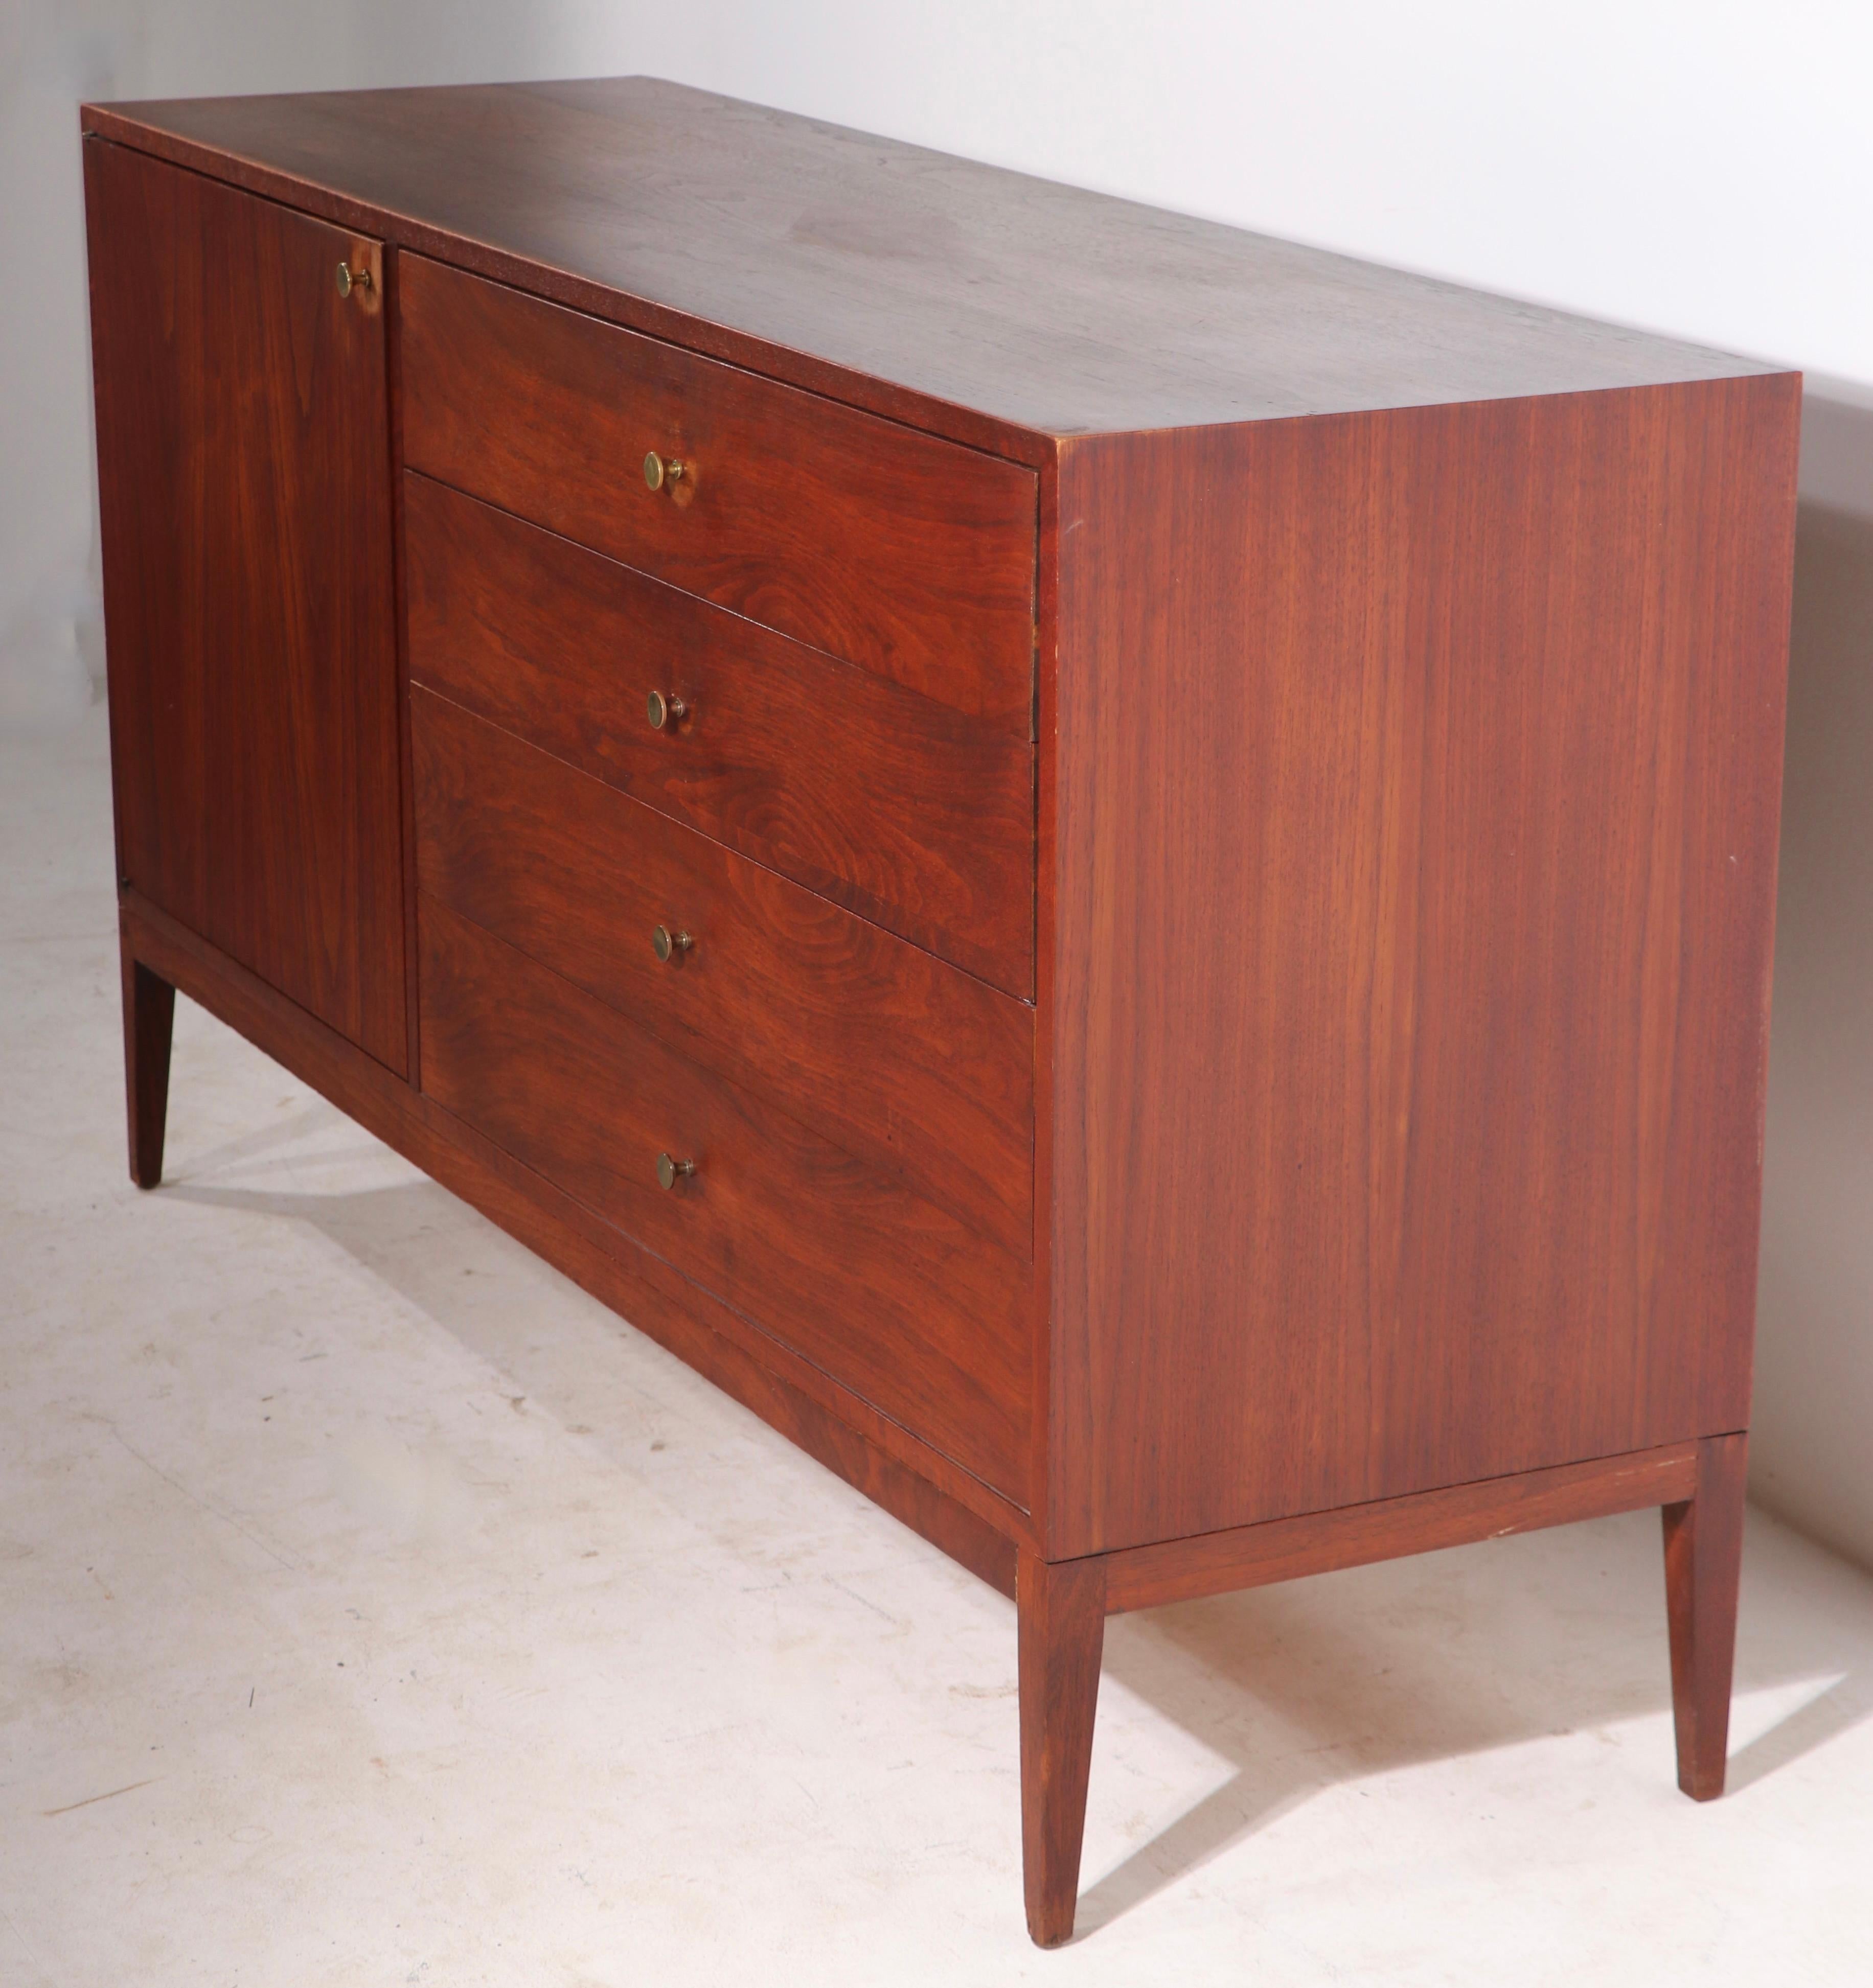 Well constructed mid-century cabinet of solid walnut, walnut veneer, and brass. The case features a bi - fold door which opens to 4 interior drawers, flanked by a bank of 4 drawers with brass pulls. The dresser is structurally sound and sturdy, the